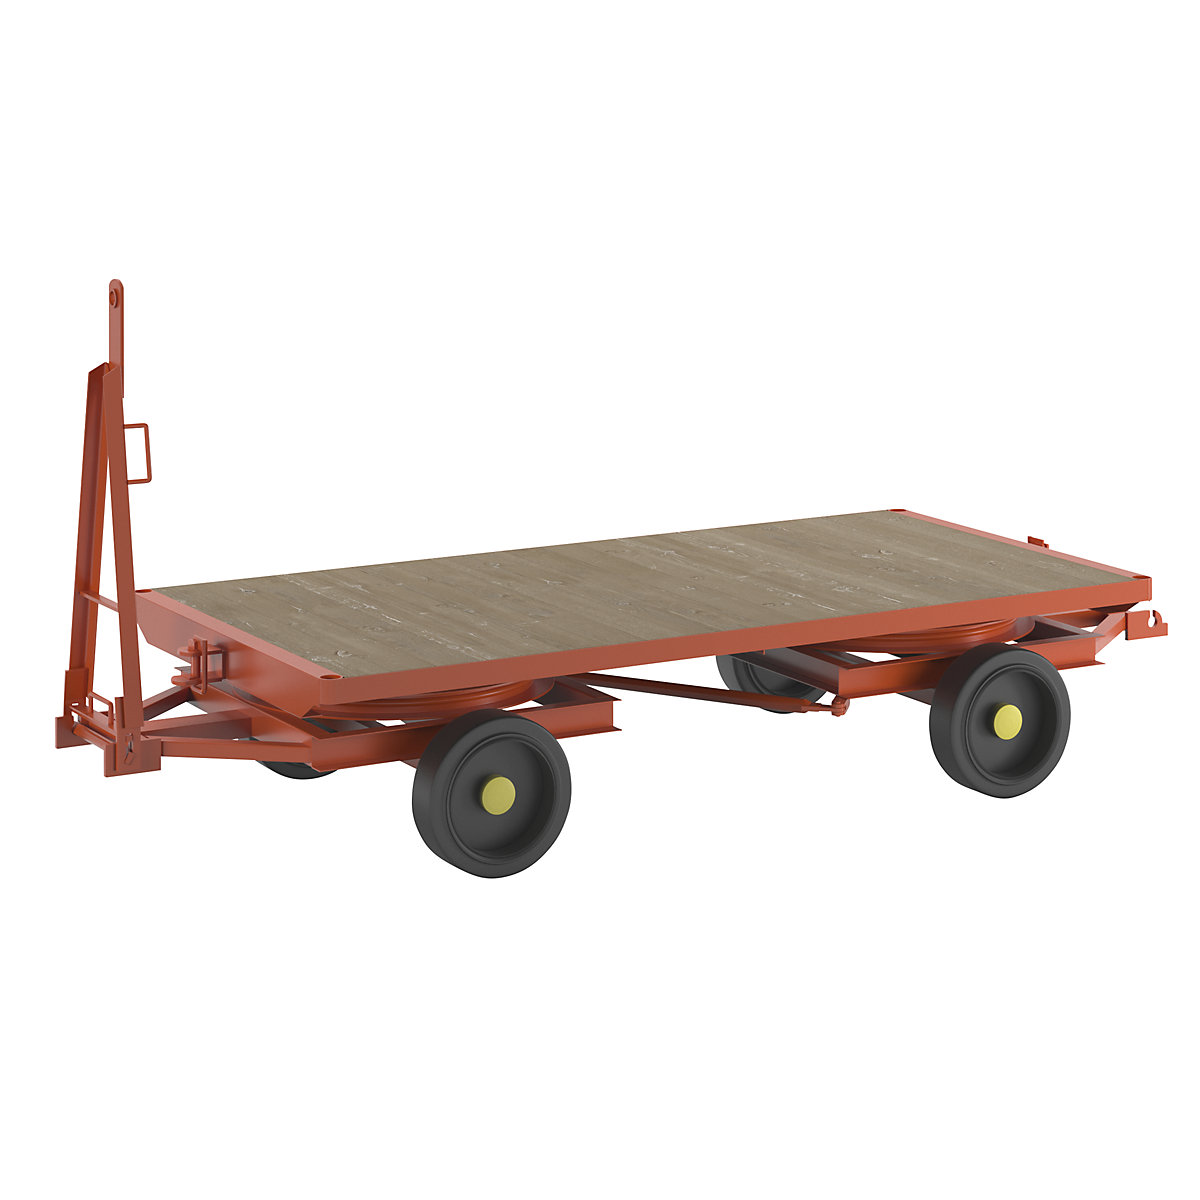 Trailer, 4-wheel double turntable steering, max. load 5 t, platform 2.5 x 1.25 m, solid rubber tyres-19